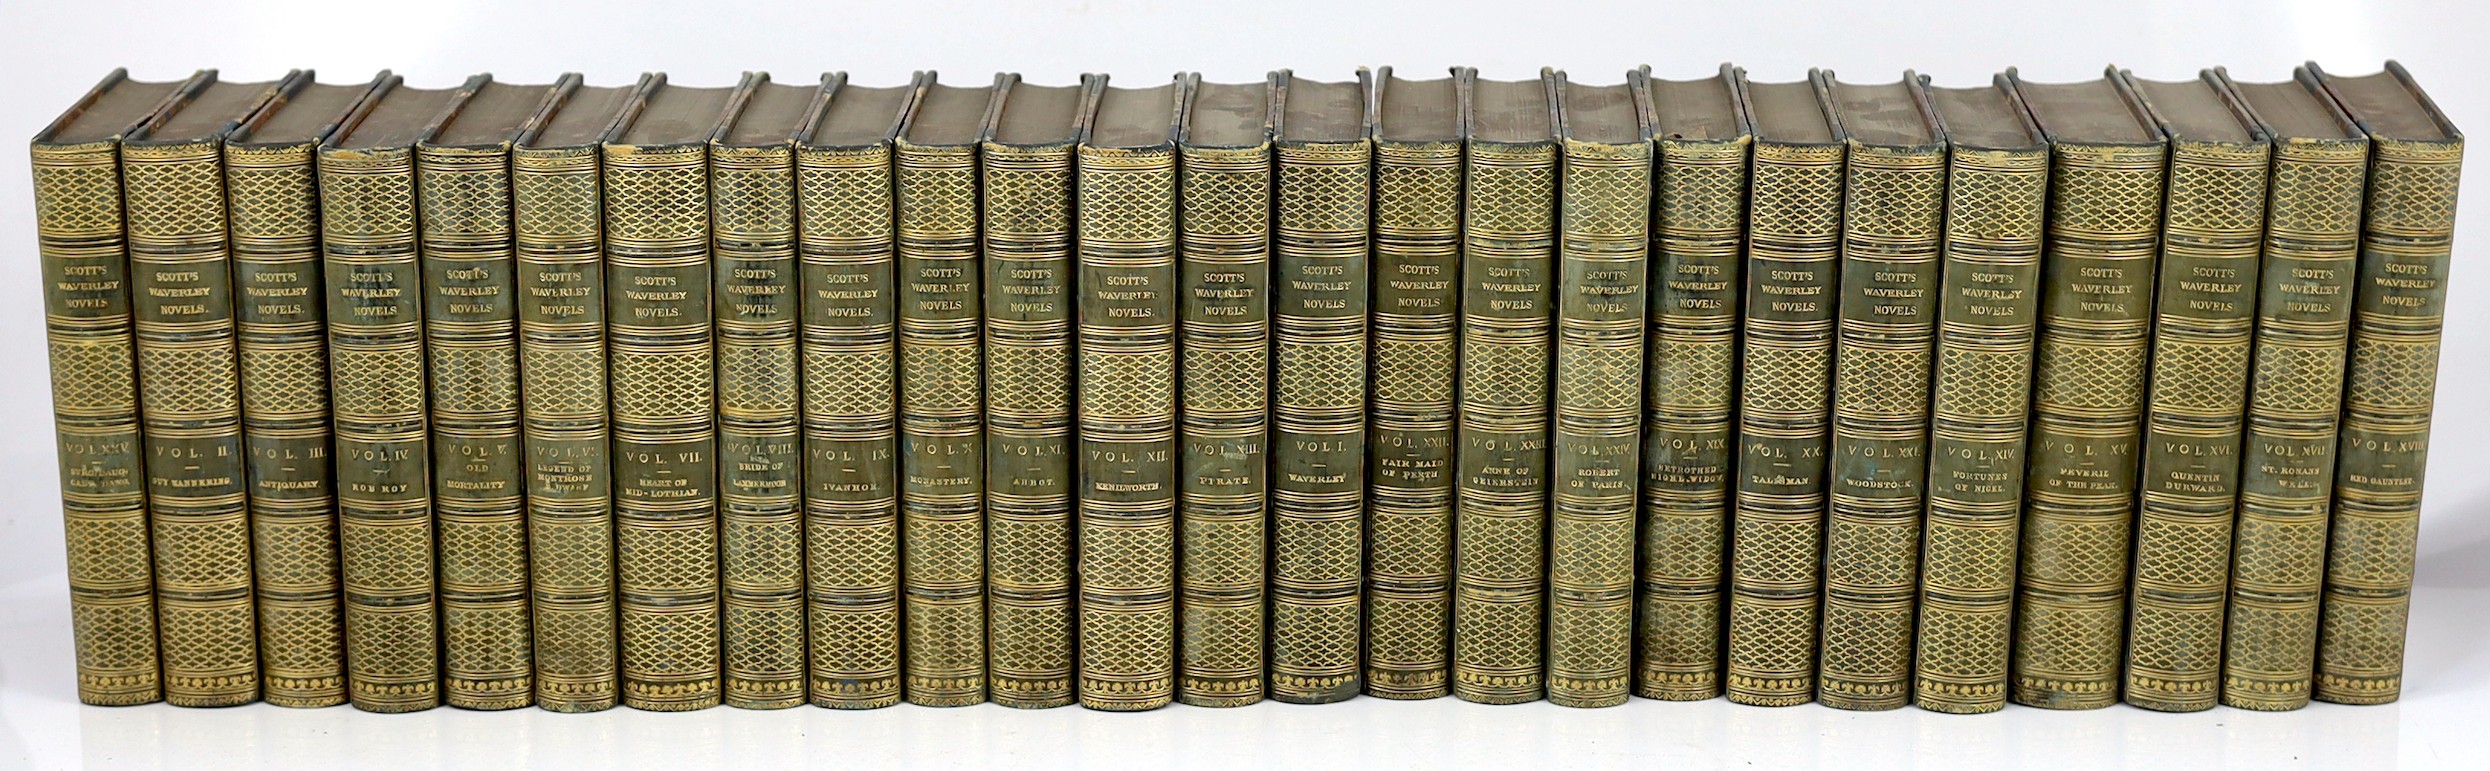 Scott, Sir Walter - [The Waverley Novels] - Centenary edition, 25 vols, 8vo., contemporary blue half-morocco over marbled paper boards, with engraved frontispieces and title vignettes, Adam and Charles Black, Edinburgh,